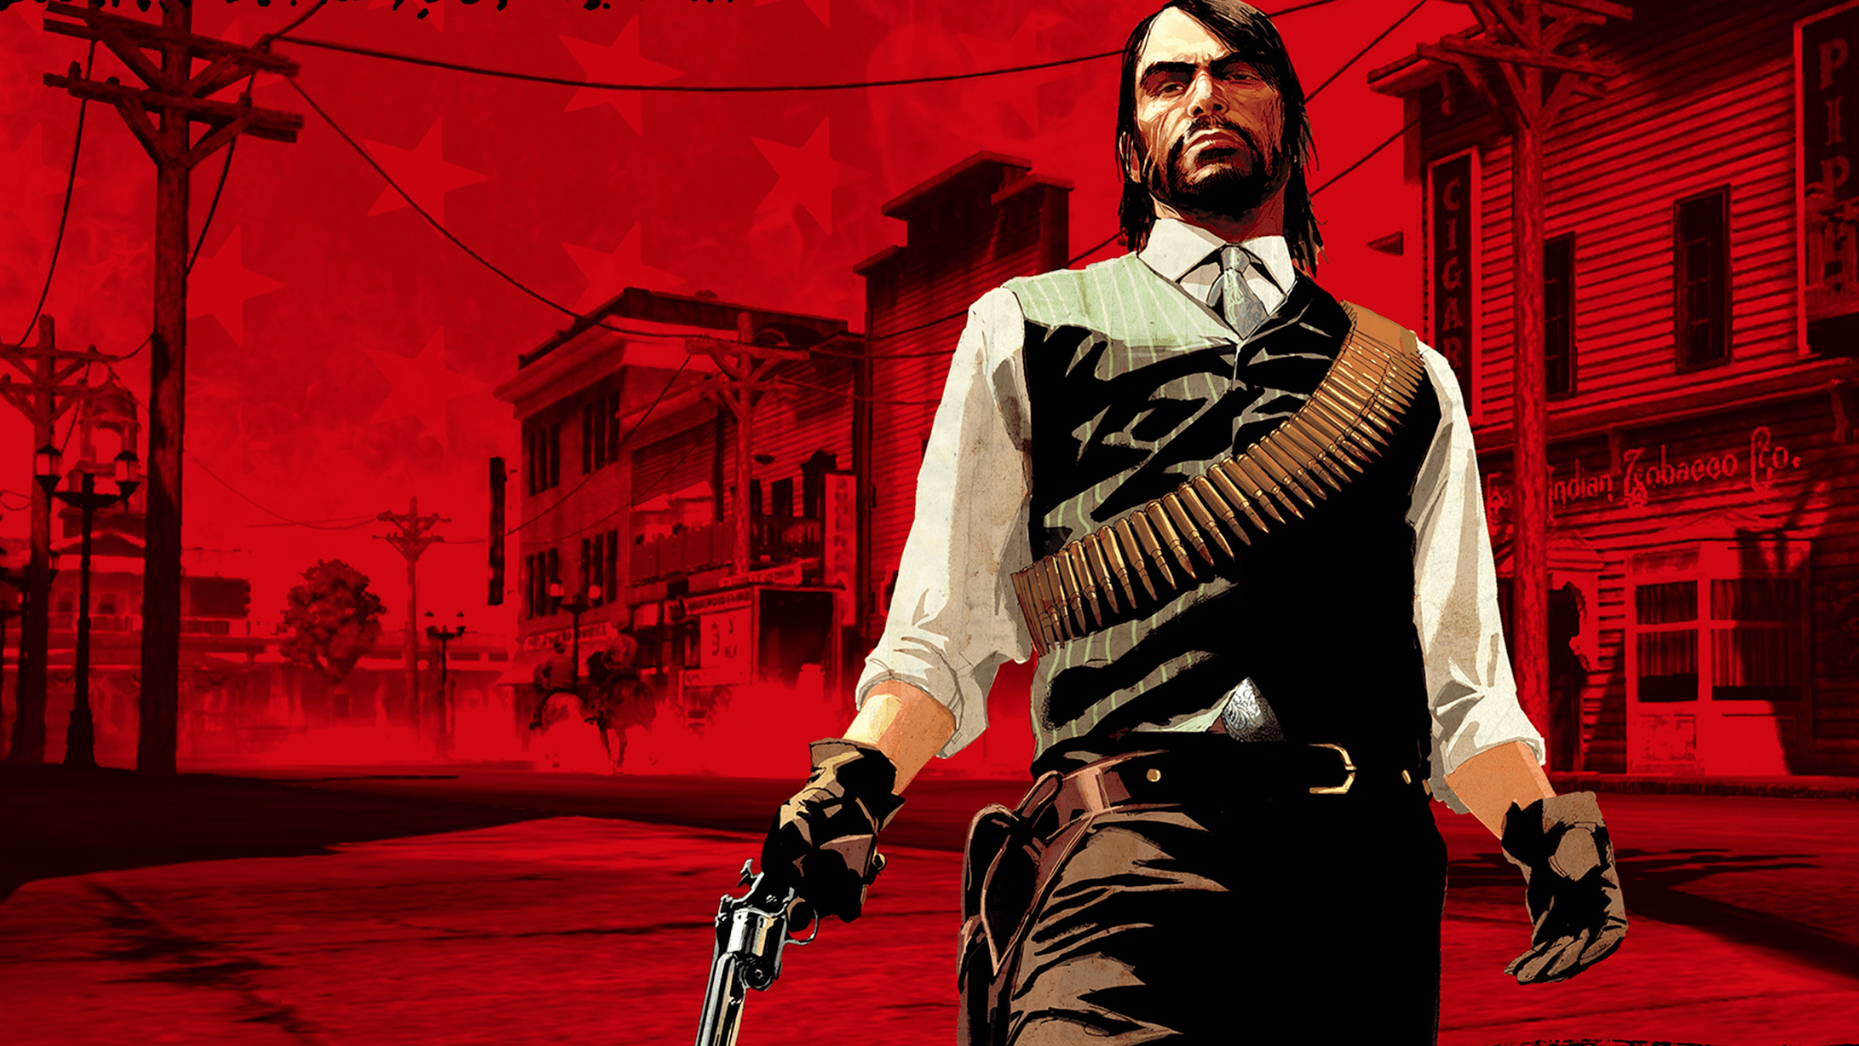 rockstar’s-original-red-dead-redemption-and-its-expansion-spotted-in-launcher-files-—-windows-gamers-may-finally-get-a-remastered-release